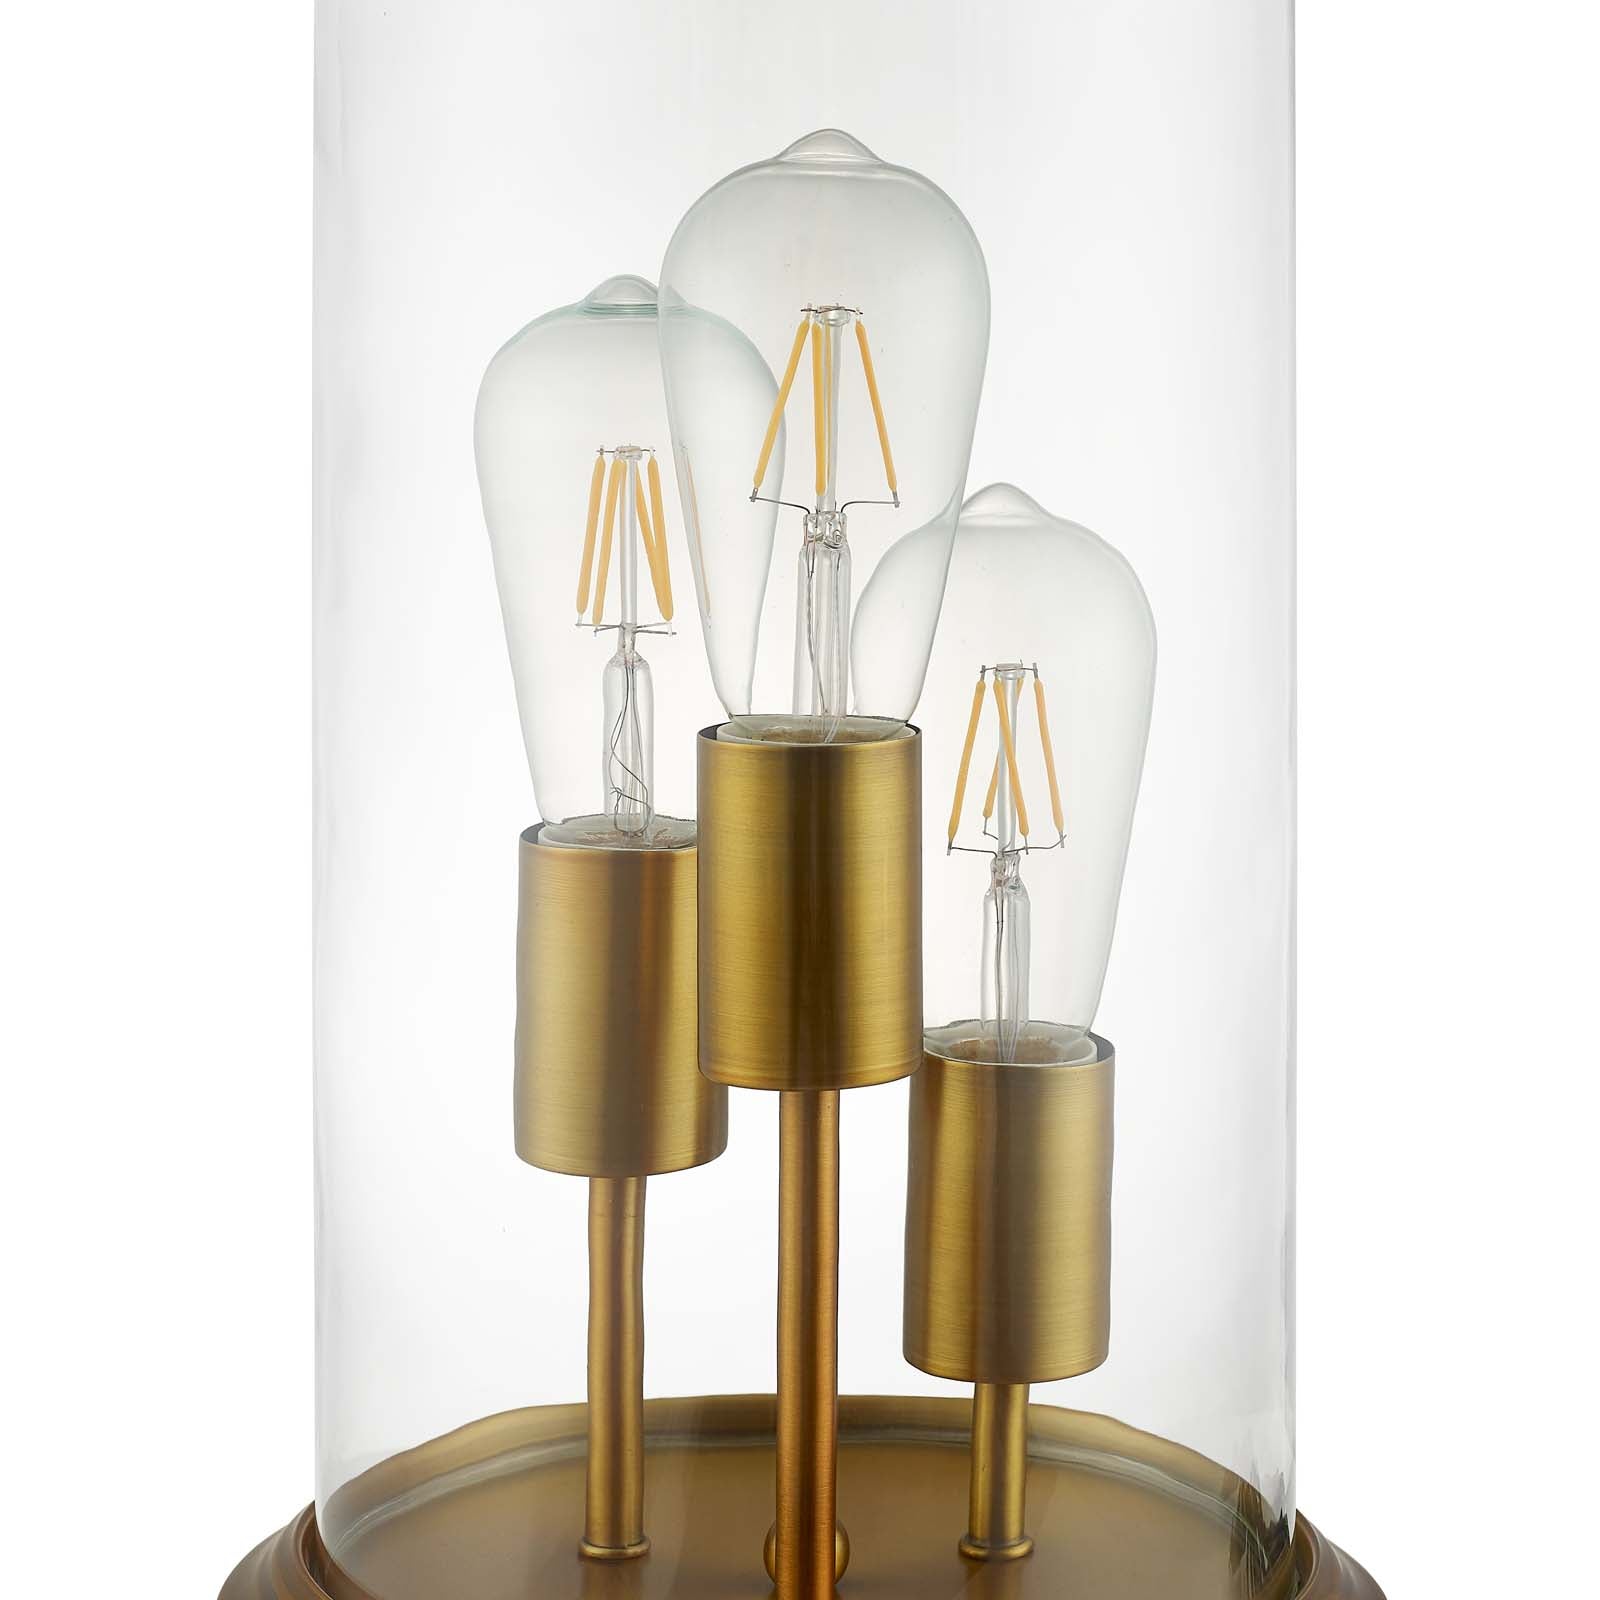 Admiration Cloche Table Lamp - East Shore Modern Home Furnishings